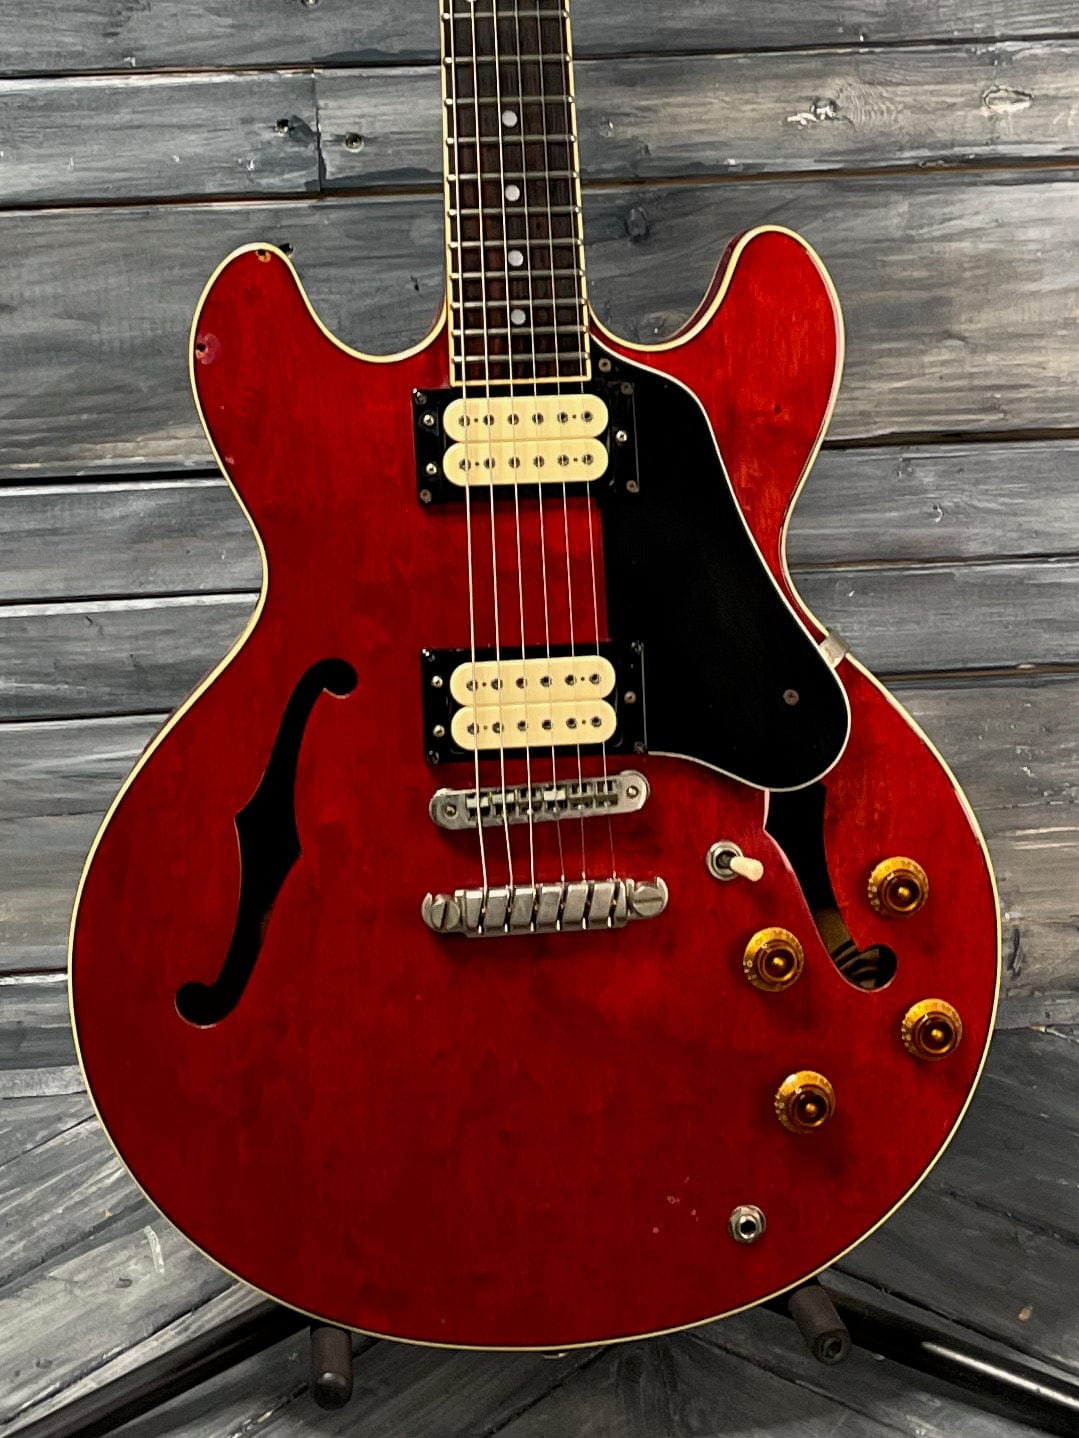 Ibanez Electric Guitar Used Ibanez 1981 MIJ Artist AM-50 Semi Hollow Electric Guitar with Case - Red